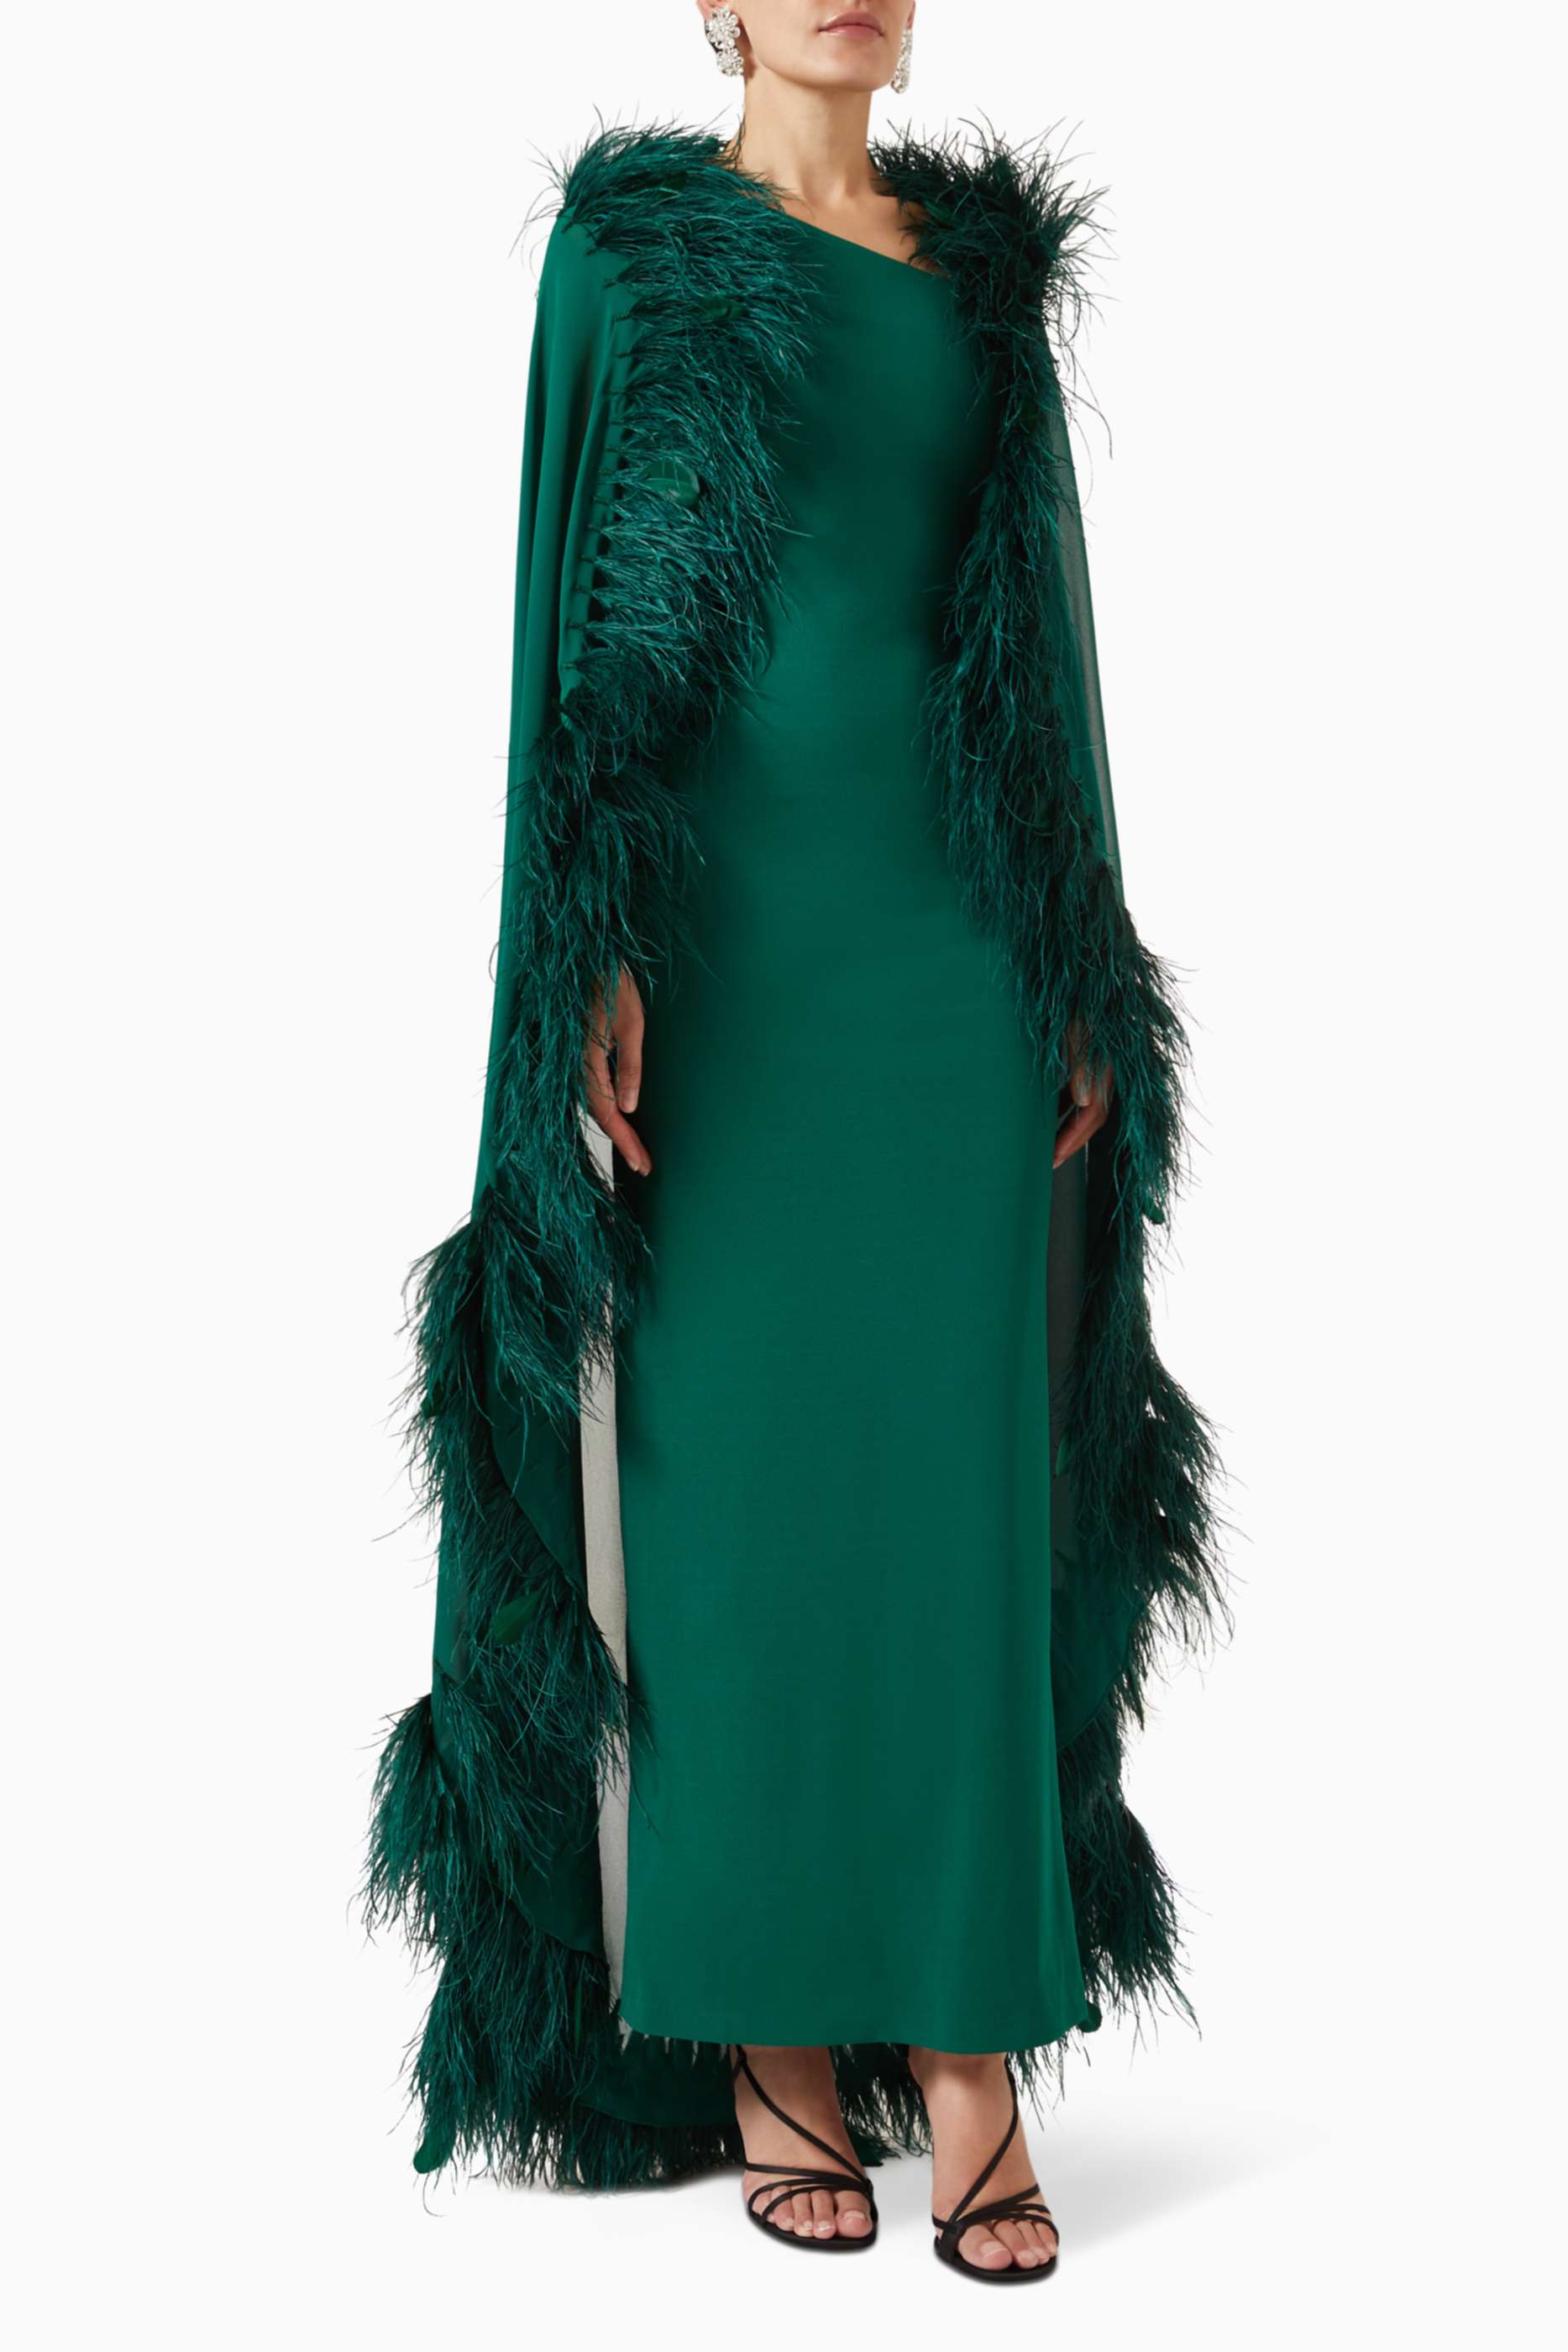 shop-velvety-couture-anya-feather-dress-in-scuba-for-women